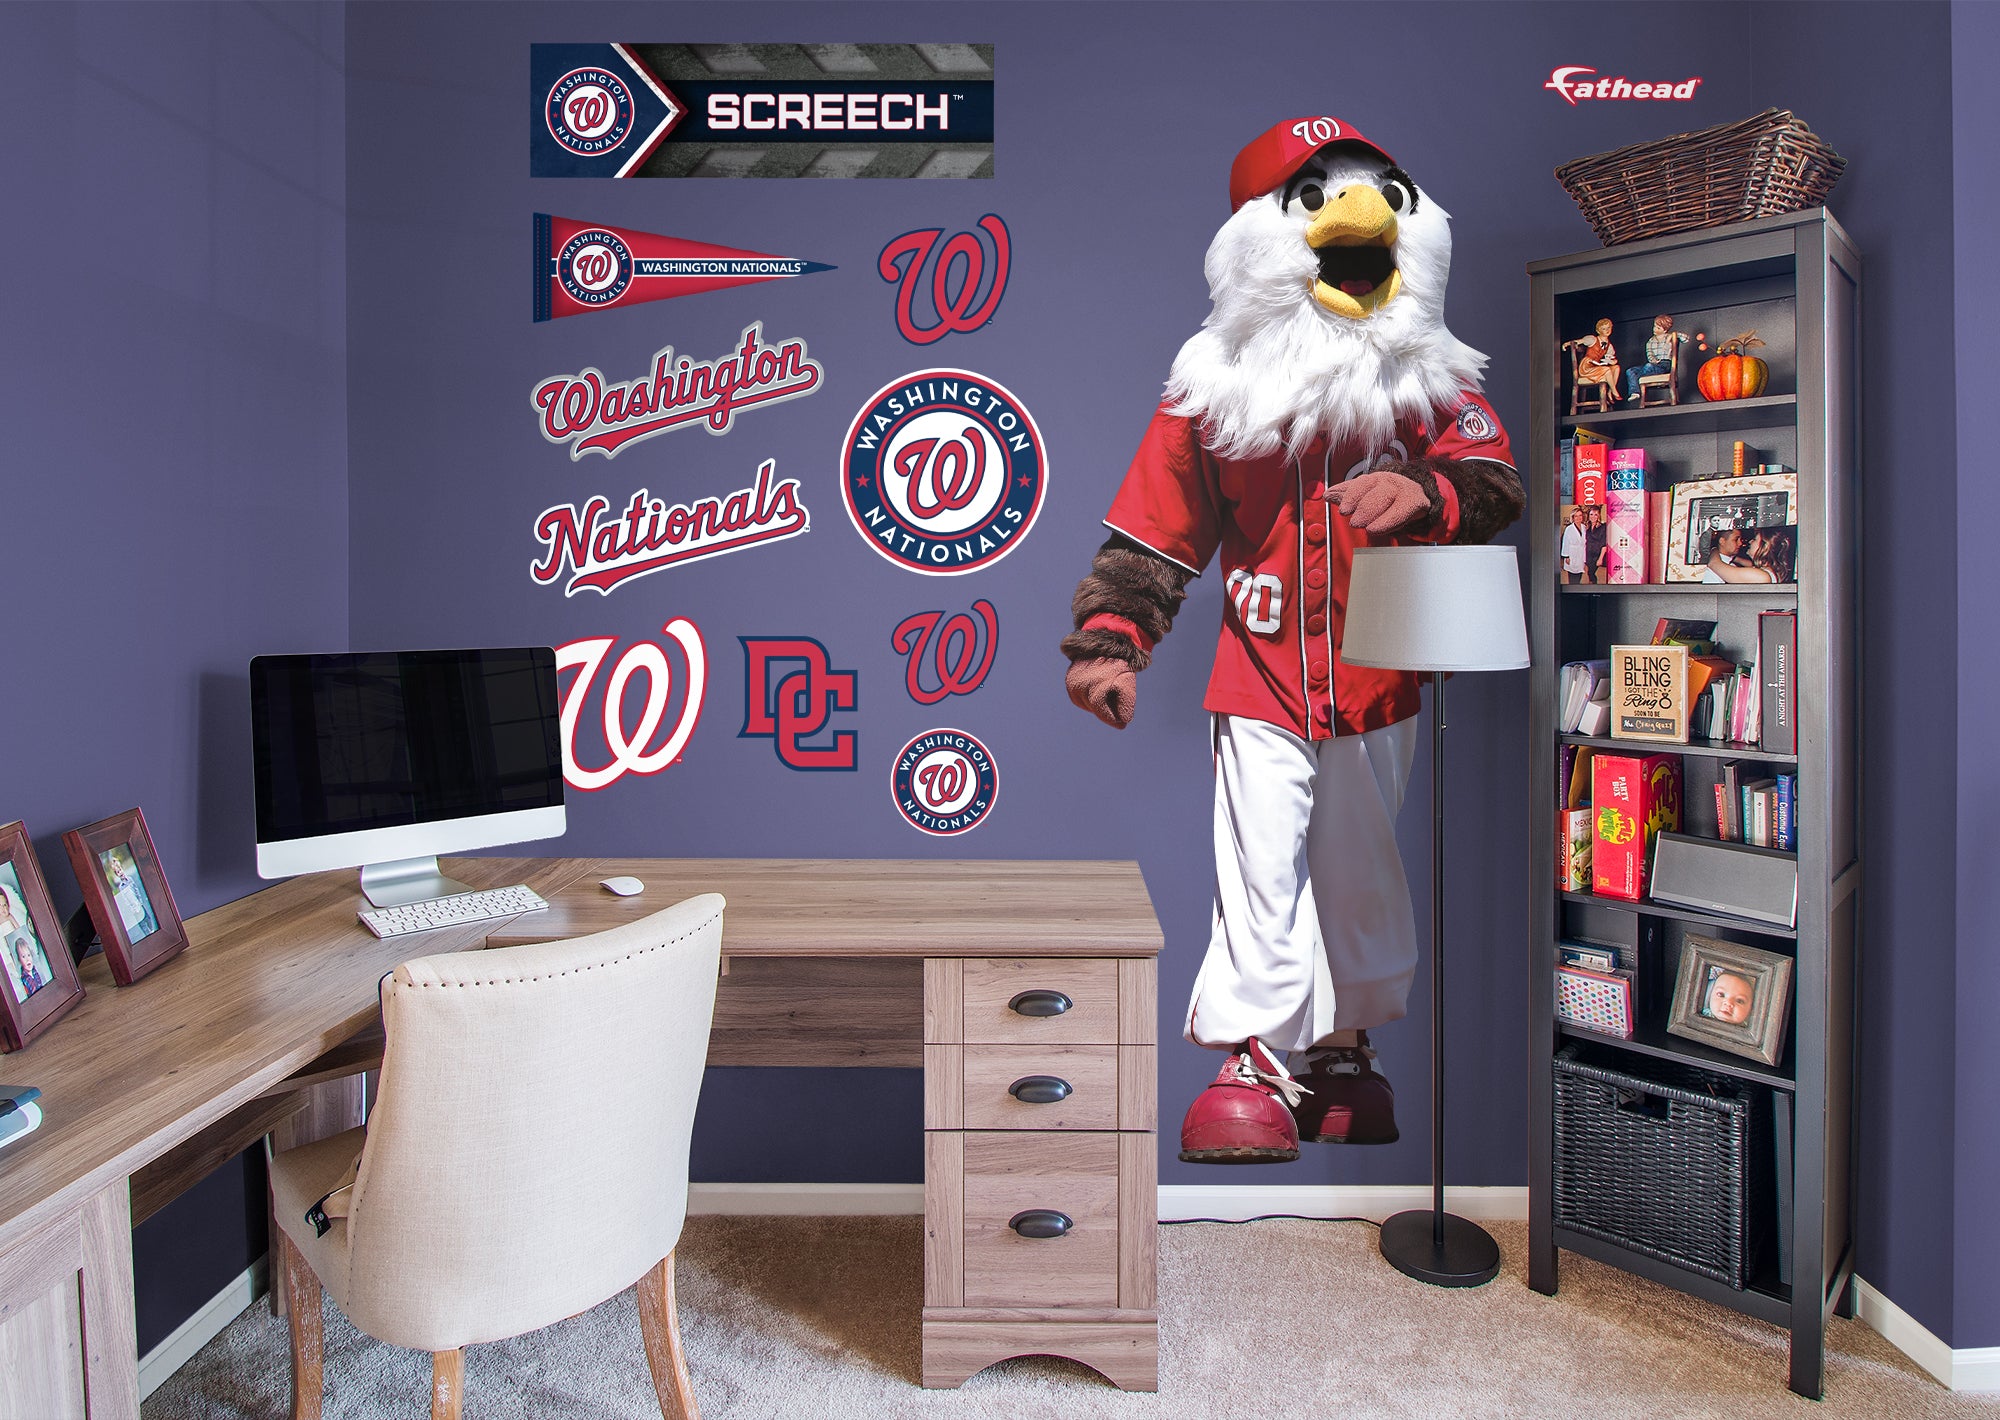 Washington Nationals on X: Hi Lil' Screech! So glad you could